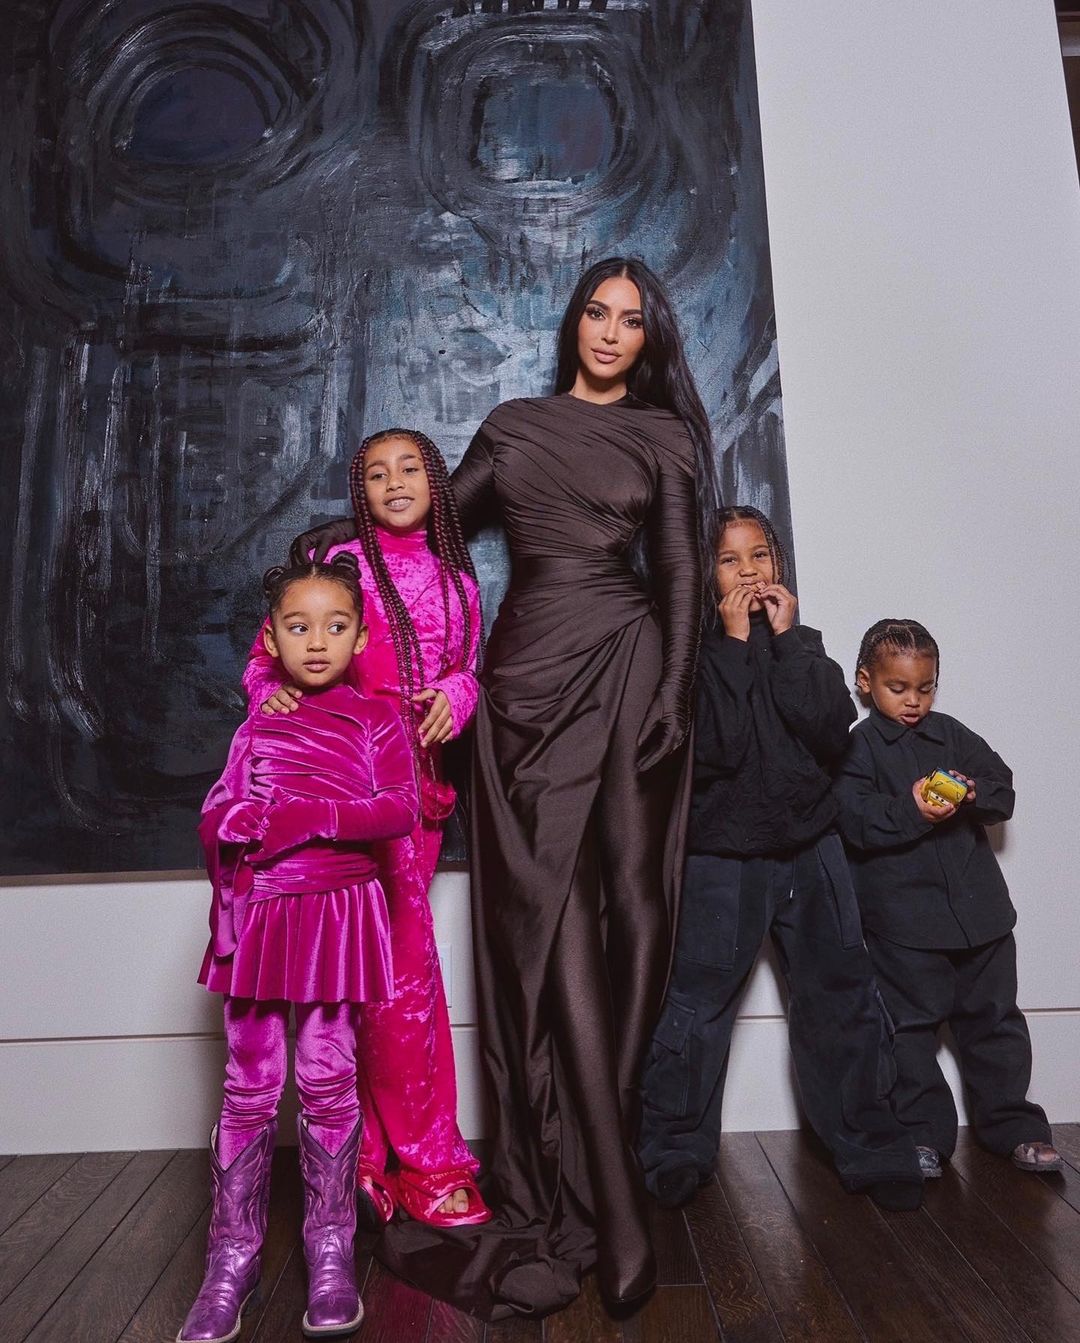 Kim recently stepped out with her kids, showing off her true skin in unedited photos